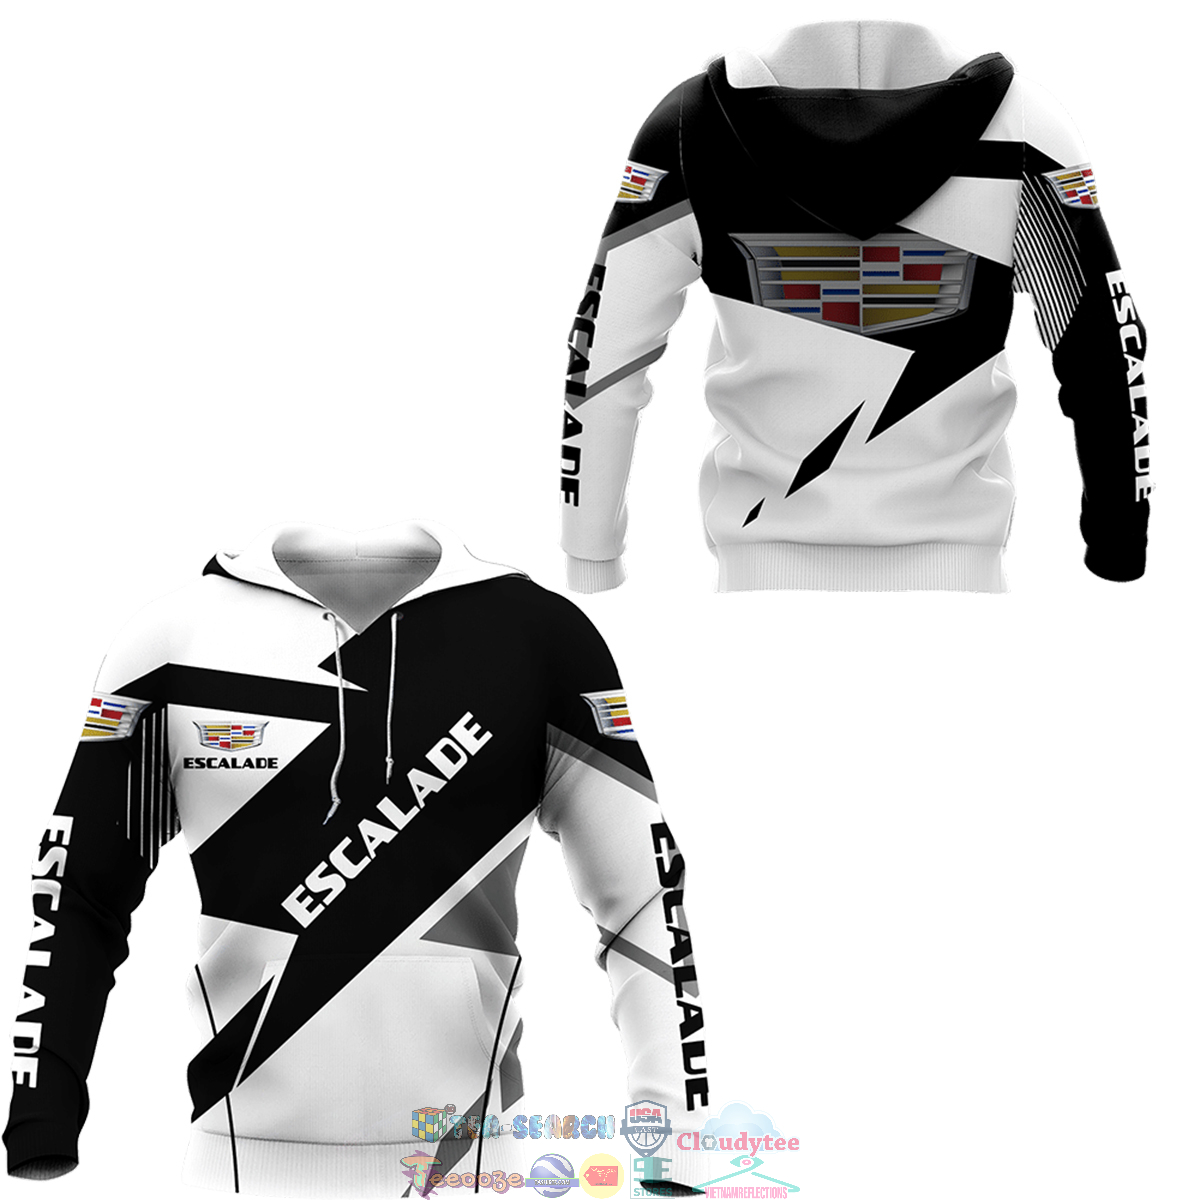 Cadillac Escalade ver 3 3D hoodie and t-shirt